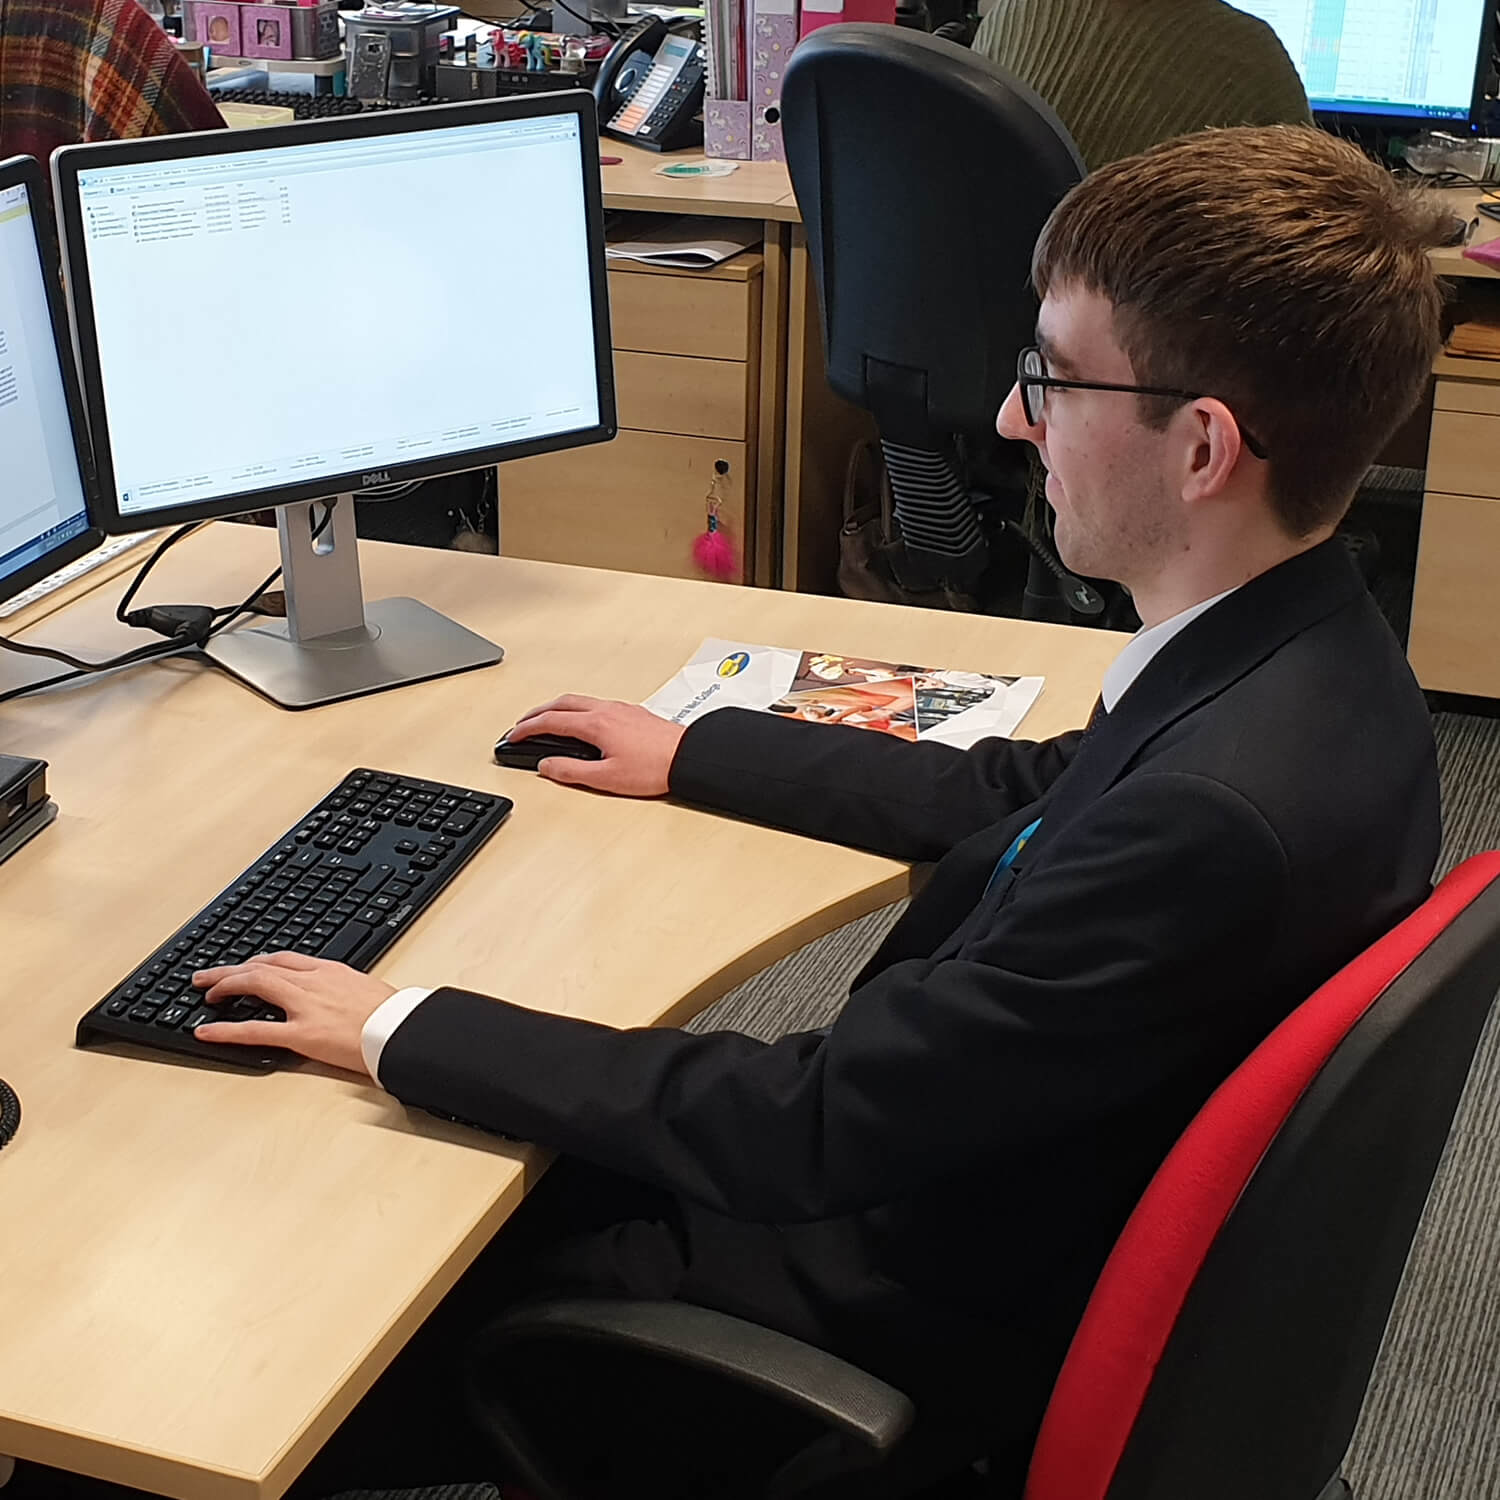 Man in suit sat on red chair at a desk looking at two computer screens